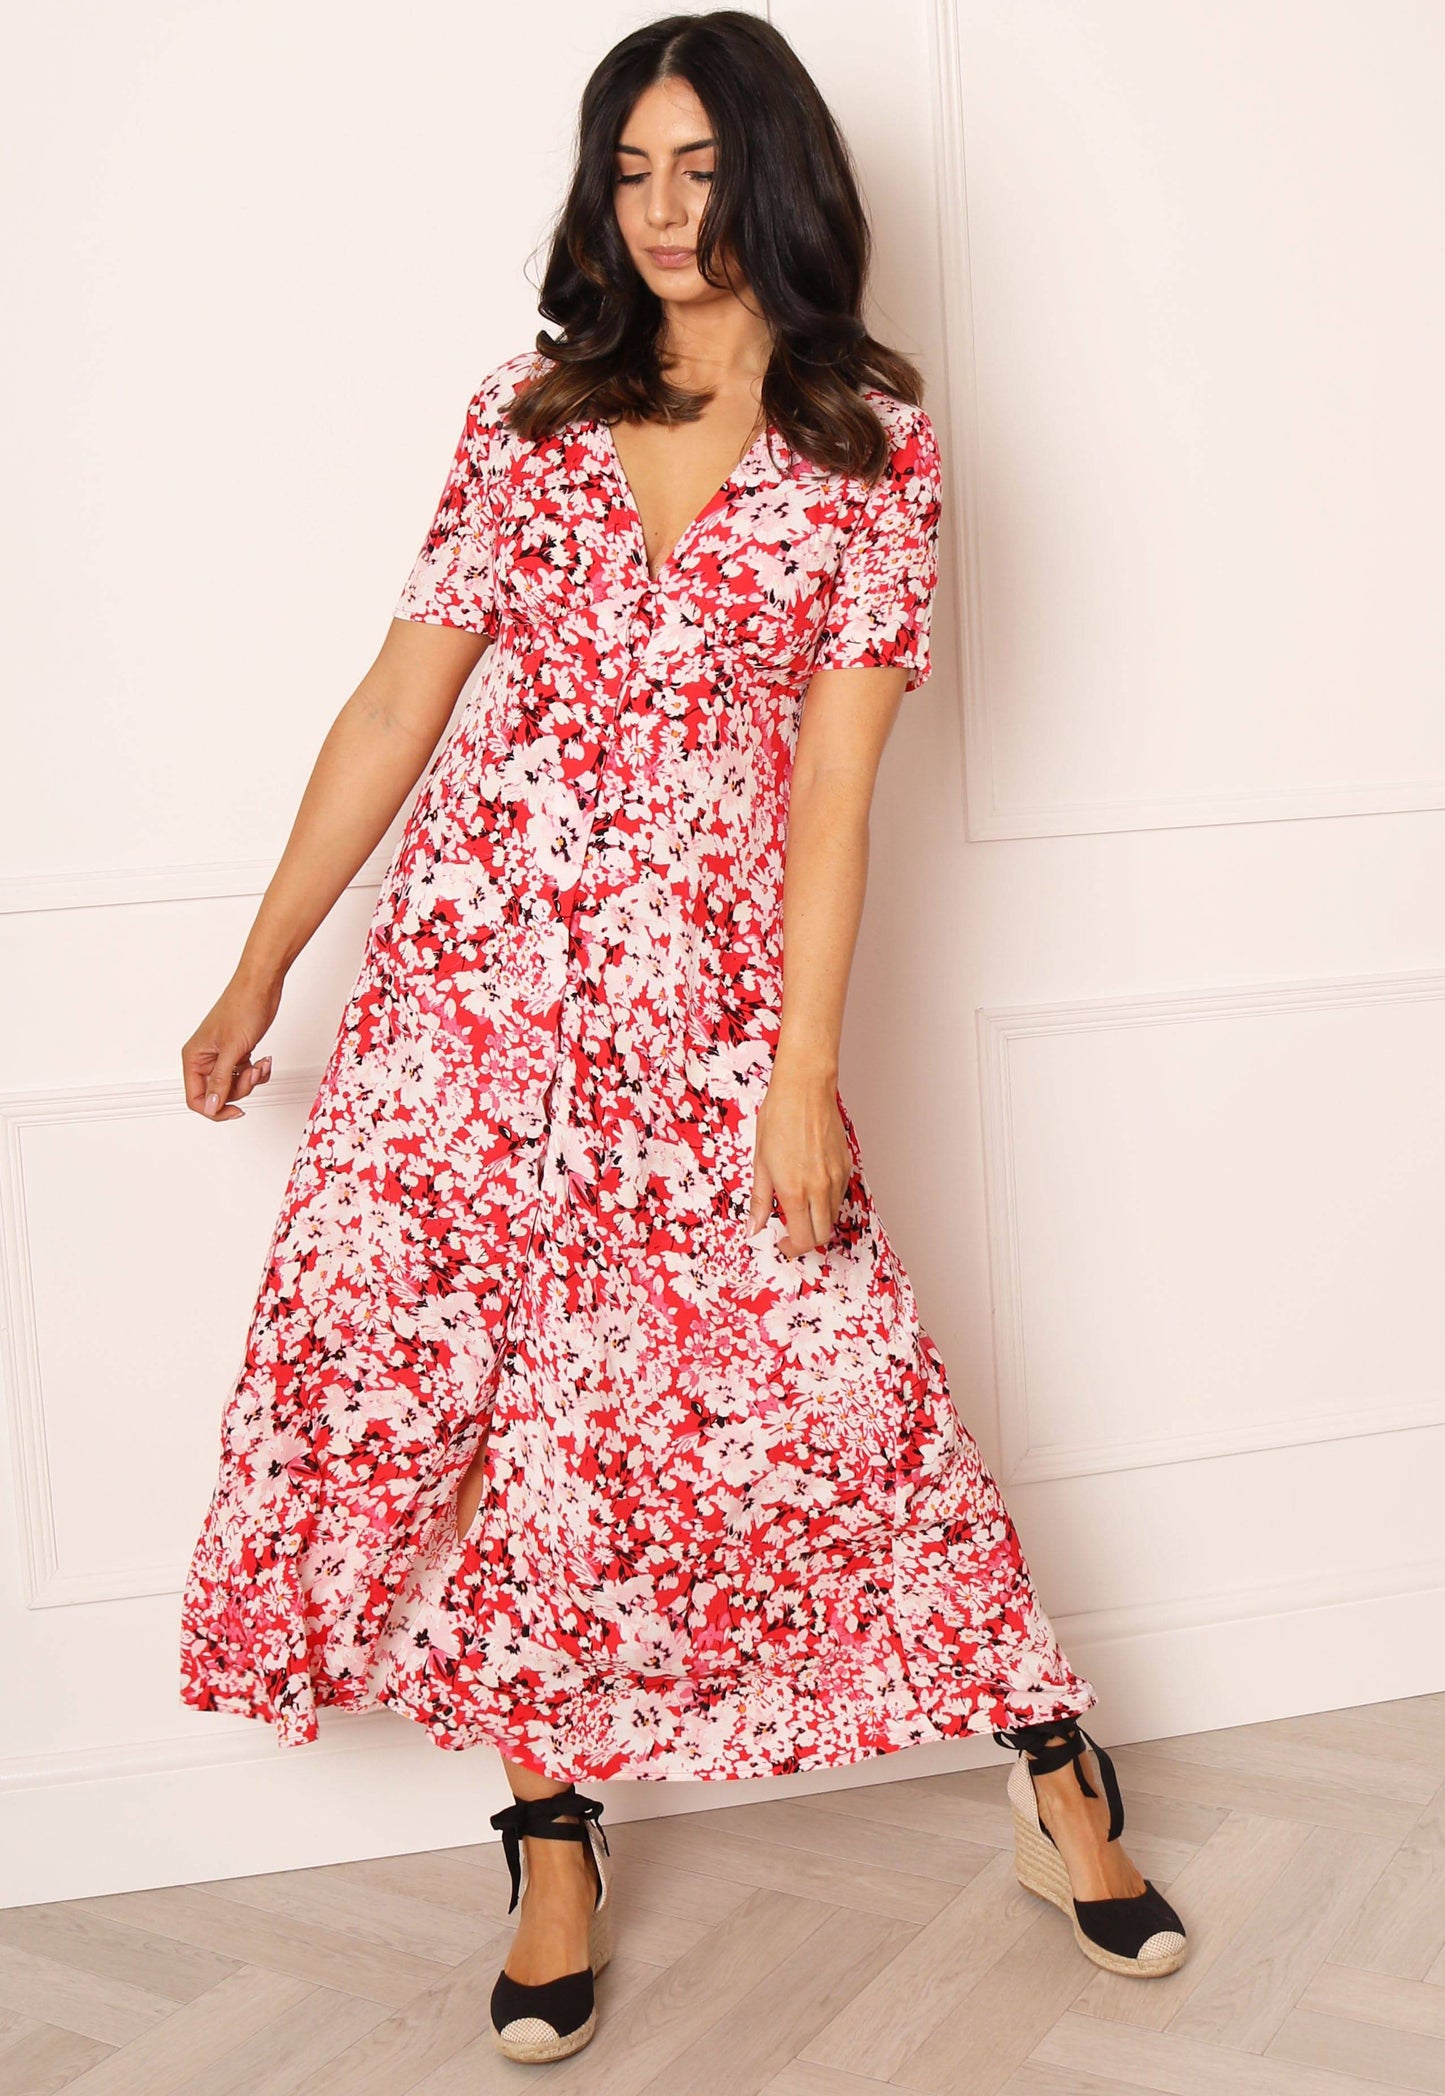 ONLY Enola Floral Print Maxi Tea Dress with Button Fastening in Red & White - concretebartops